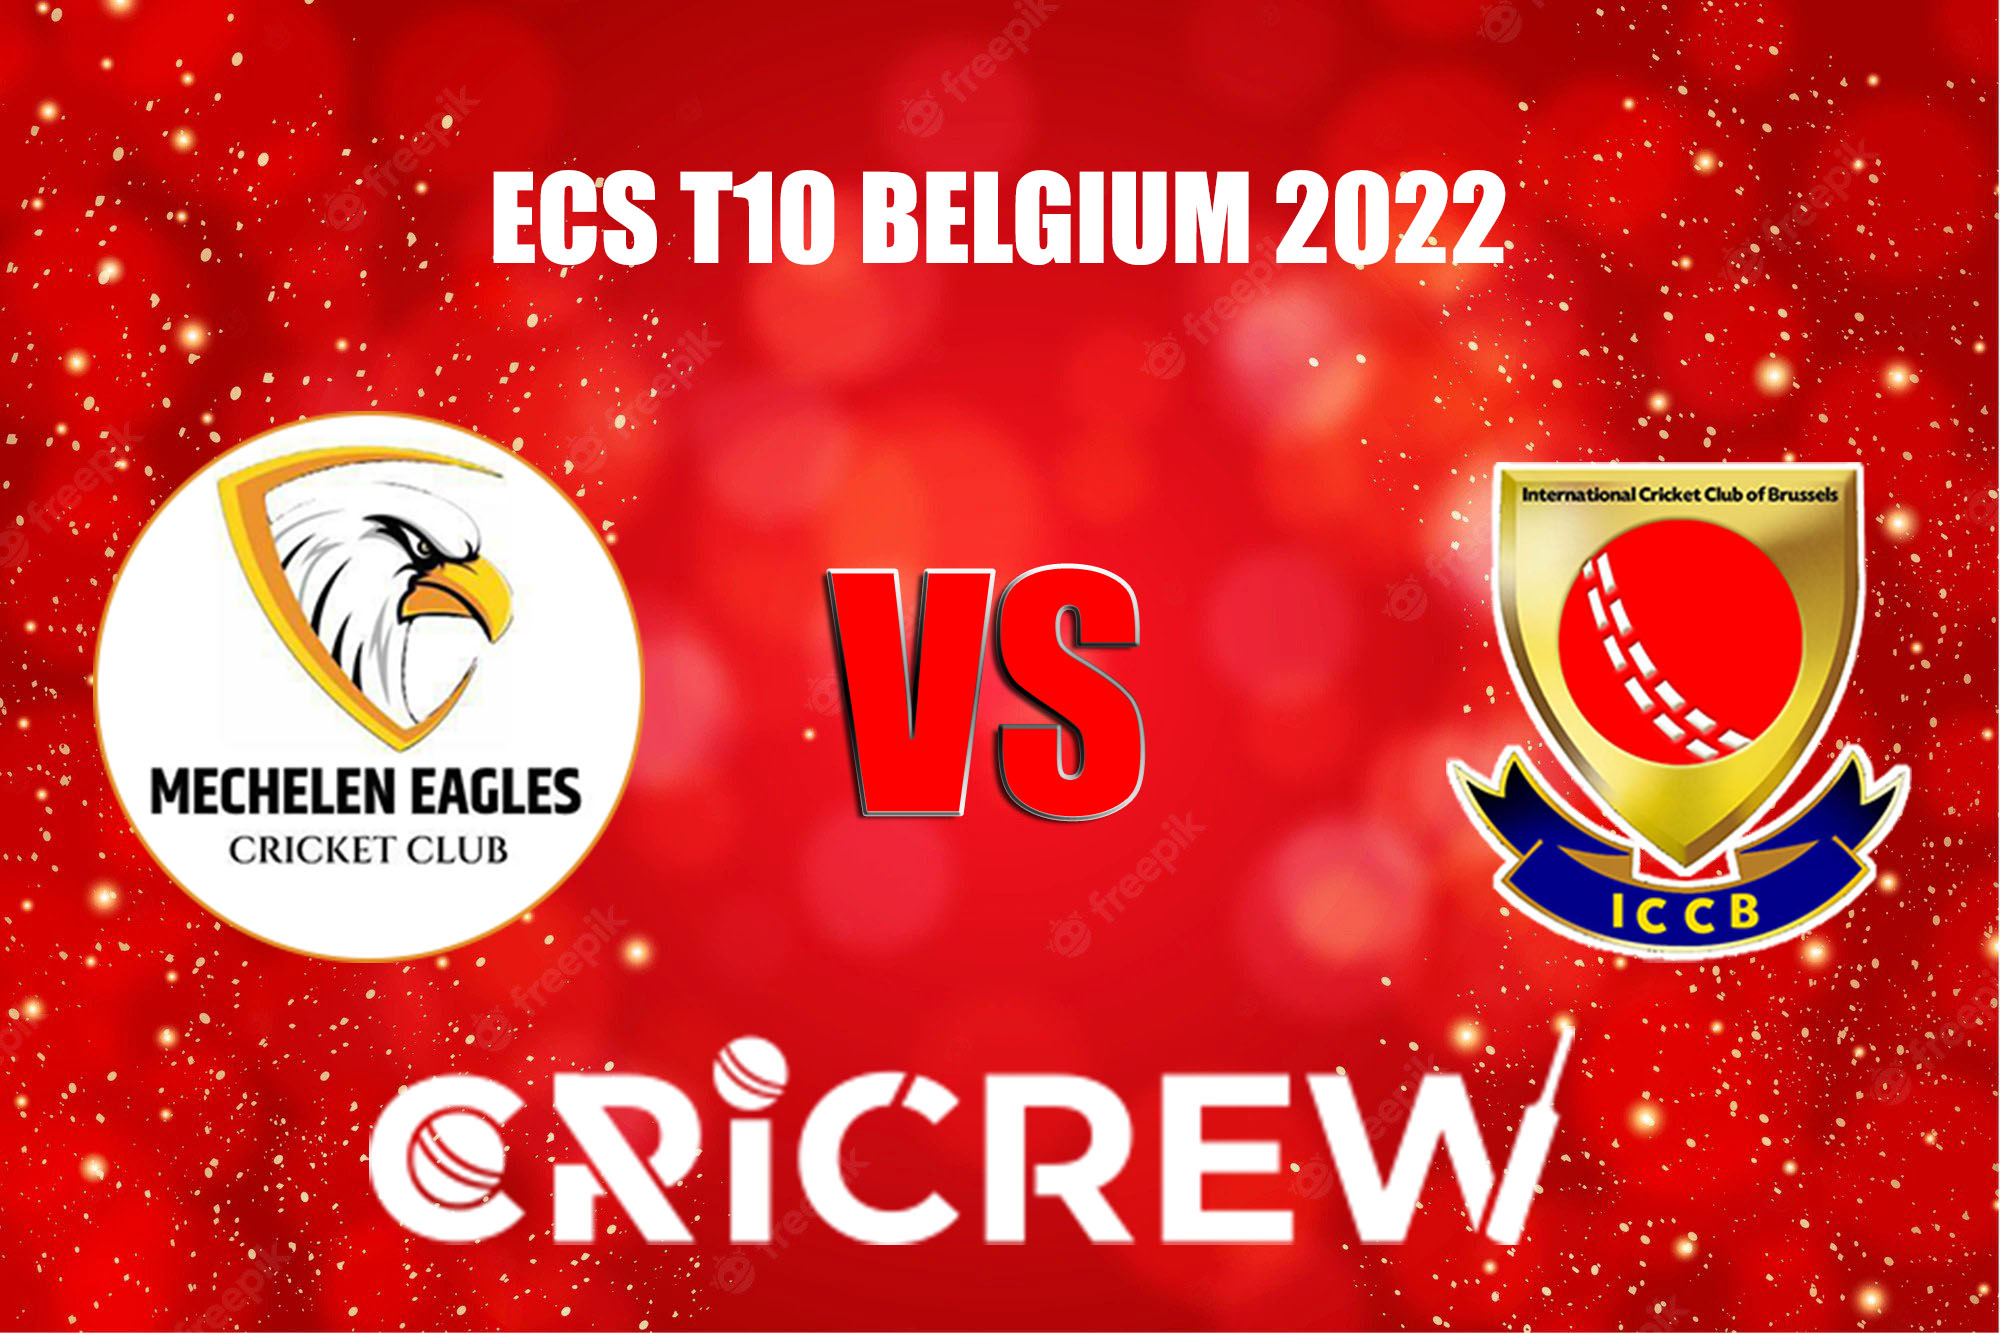 MECC vs ICCB Live Score starts on 09 Sep, 04:00 PM IST at Vrijbroek Cricket Ground in Mechelen, Belgium. Here on www.cricrew.com you can find all Live, Upcoming